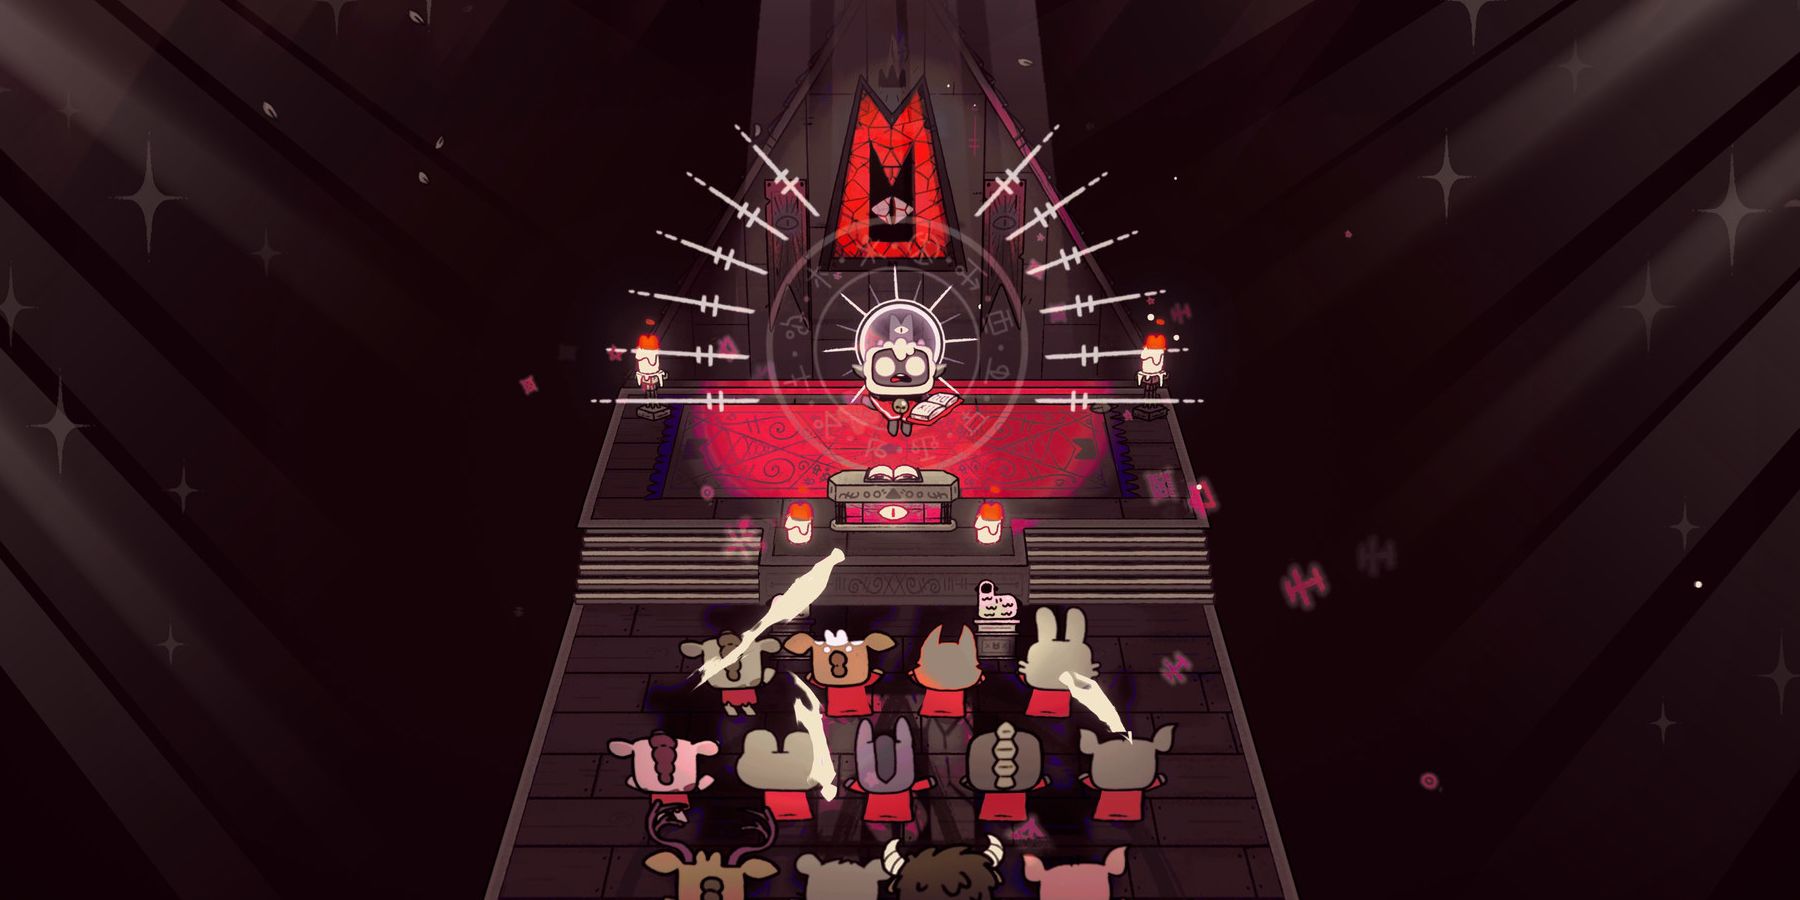 The player's character in Cult of the Lamb delivers a sermon within the cult's temple.